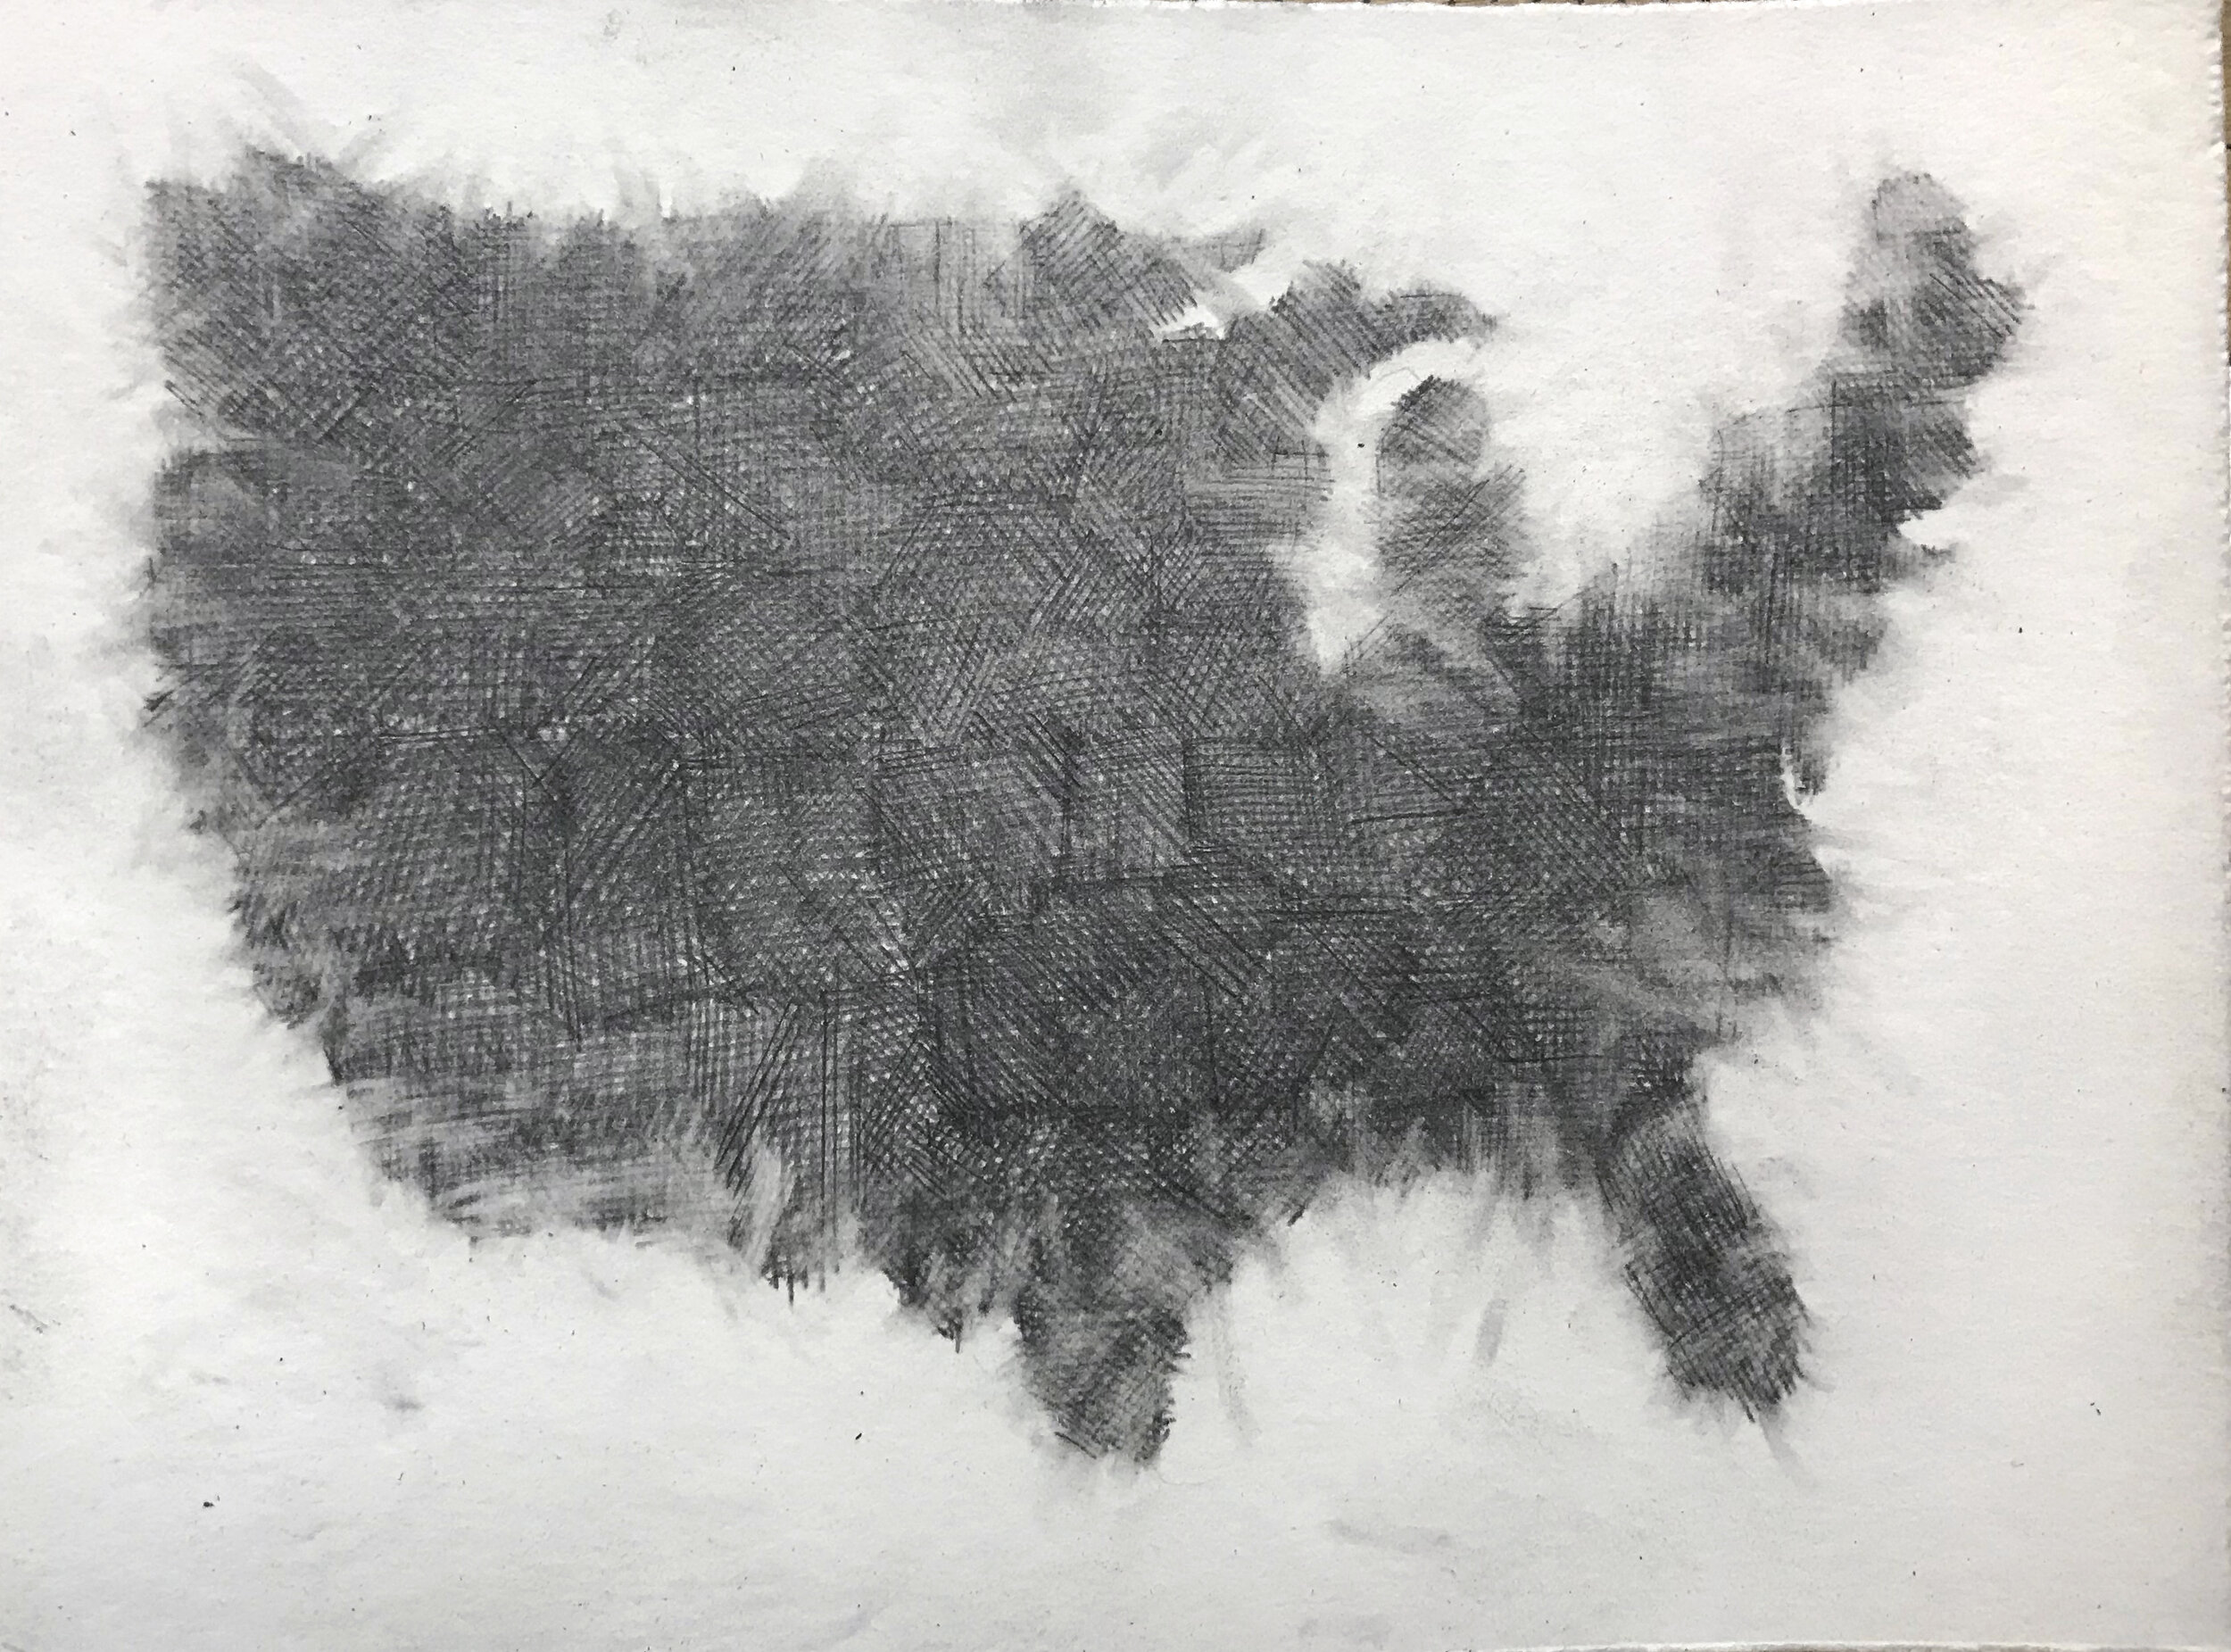  Thought Exercise V  6” x 4-1/2”  graphite on paper  2019 